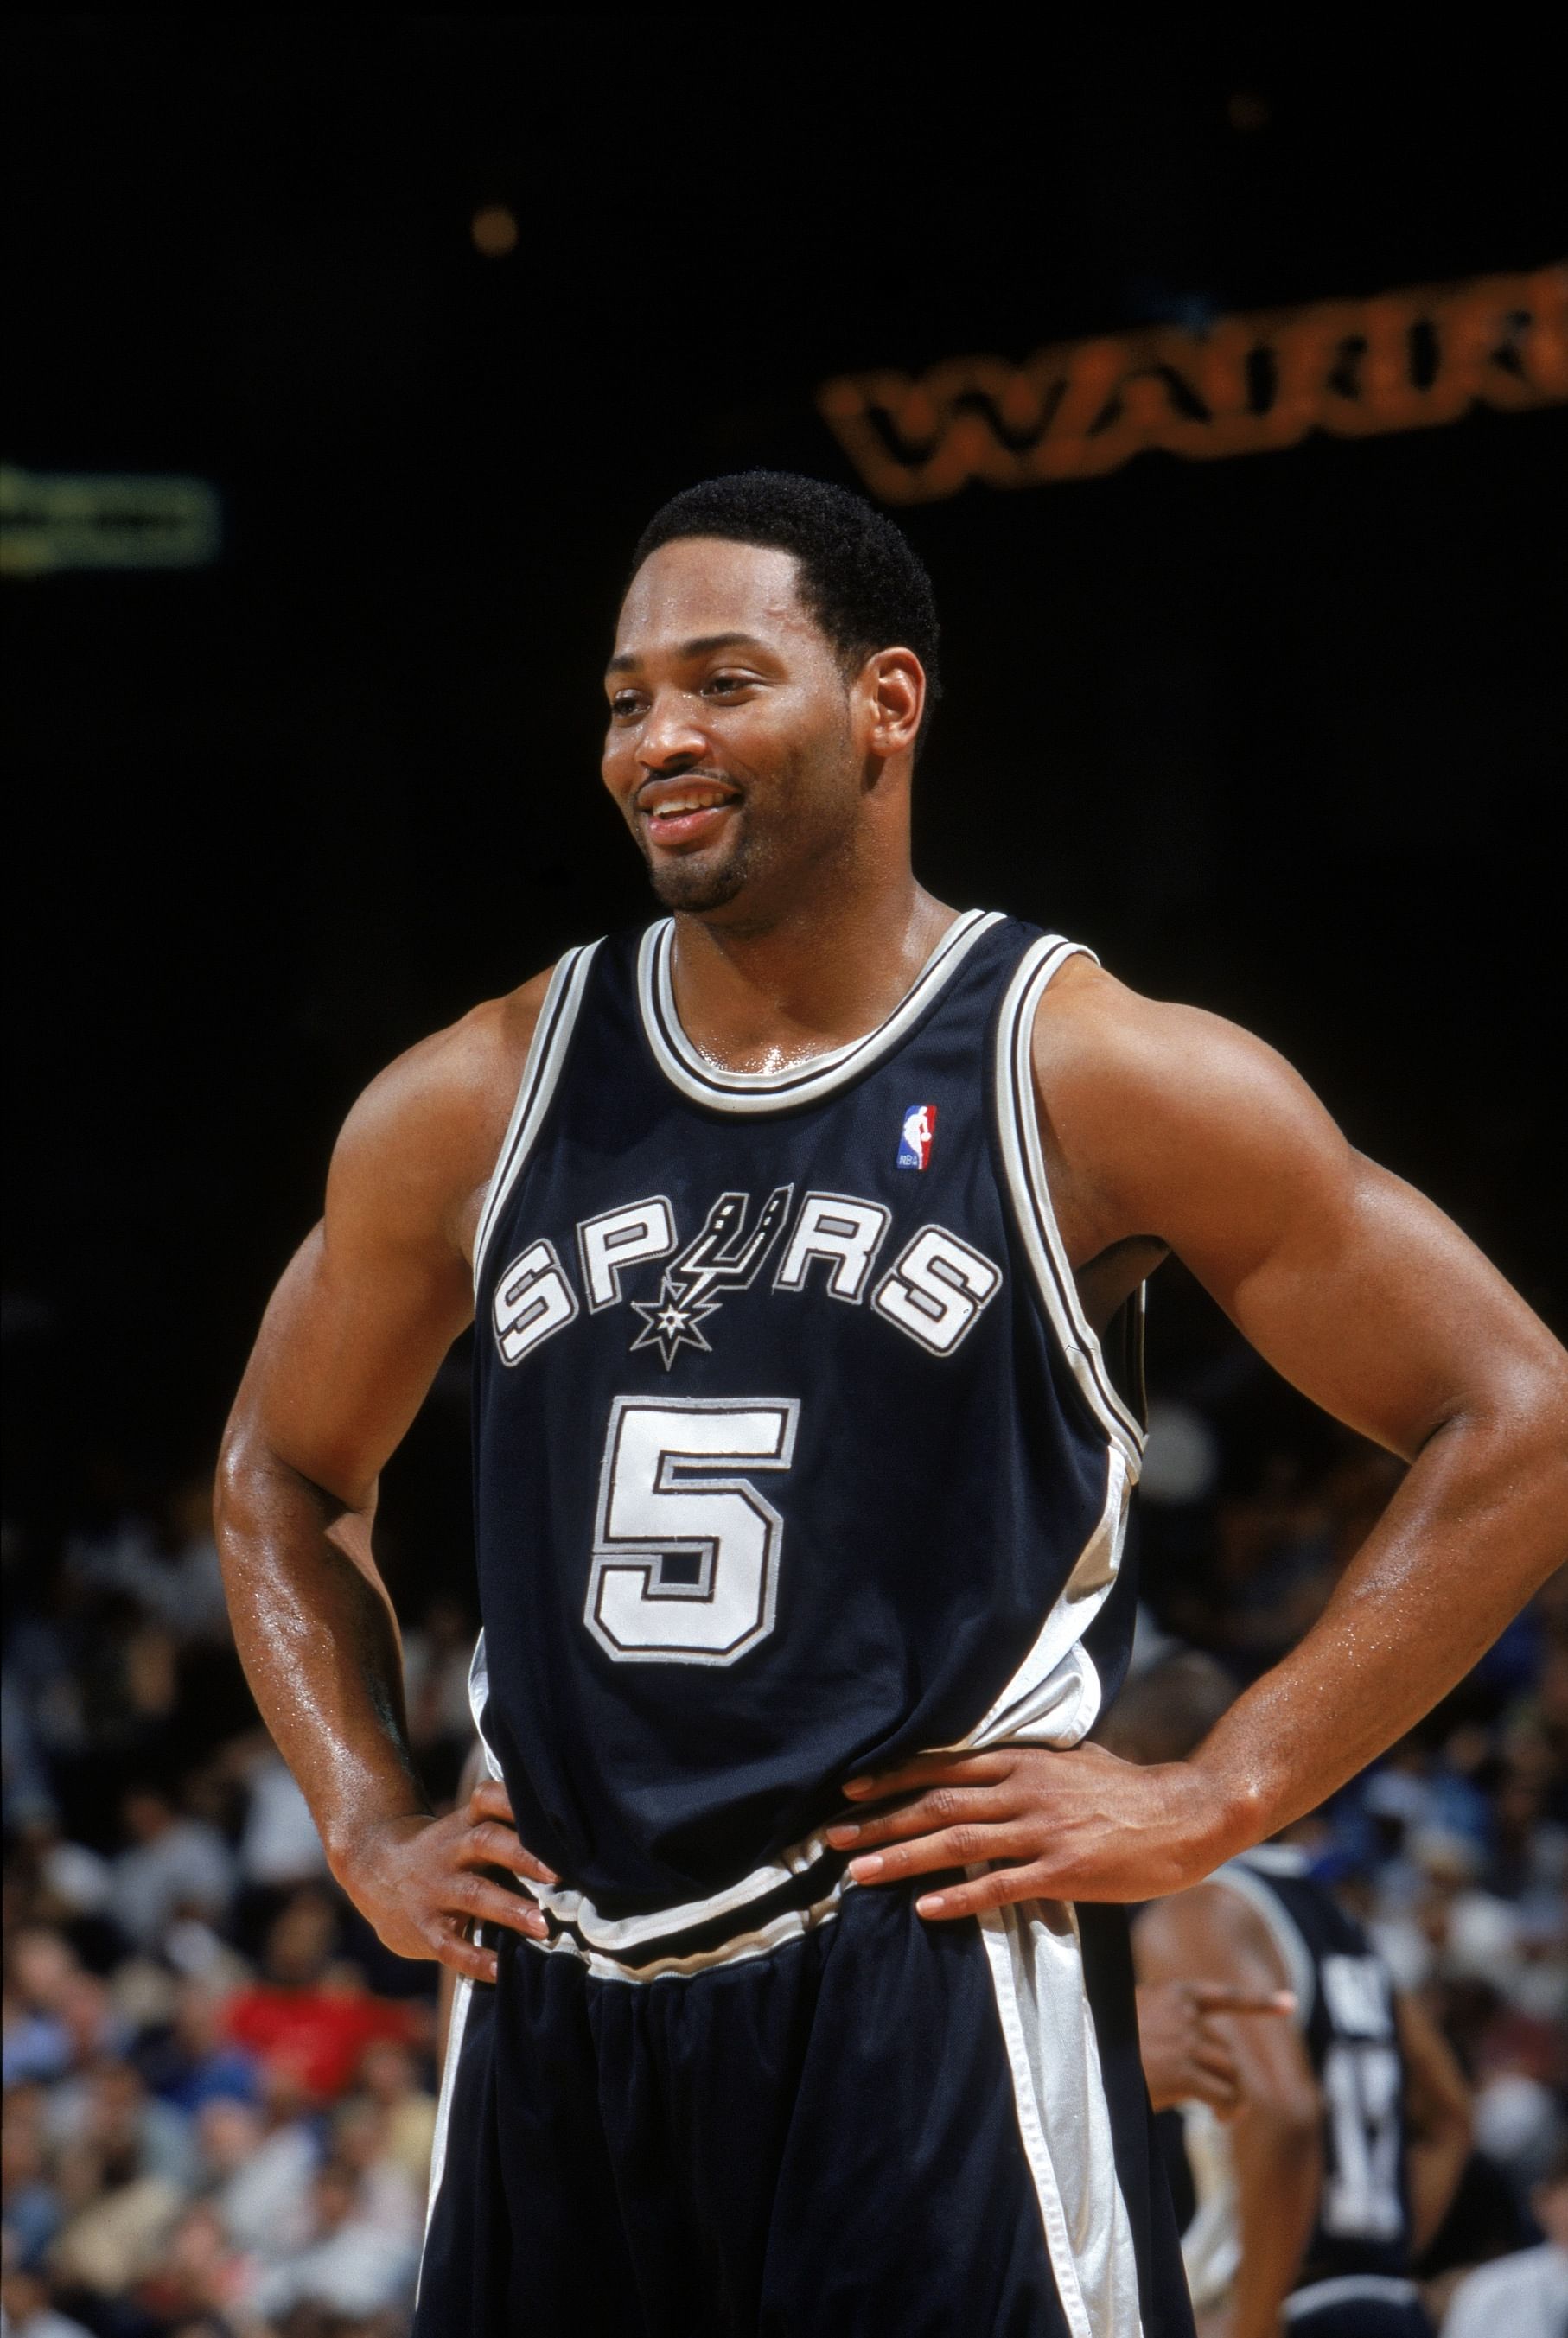 Seven time NBA chamipon Robert Horry set to visit India